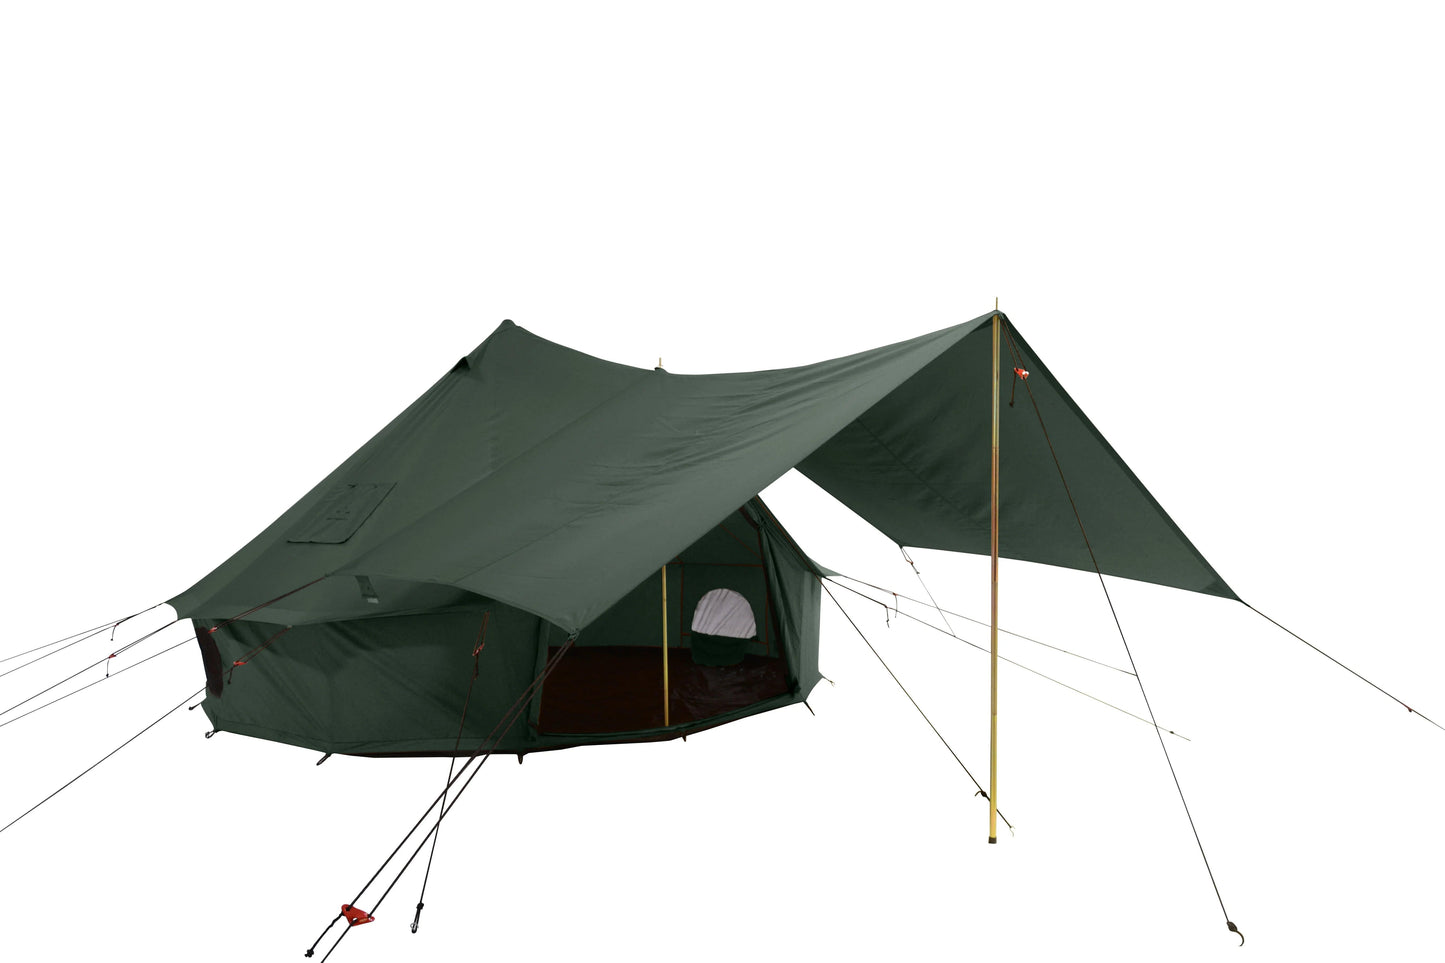 White Duck Outdoors Canvas Tent Accessories Forest Green Awning for for White Duck Outdoors Regatta and Avalon Canvas Bell Tents